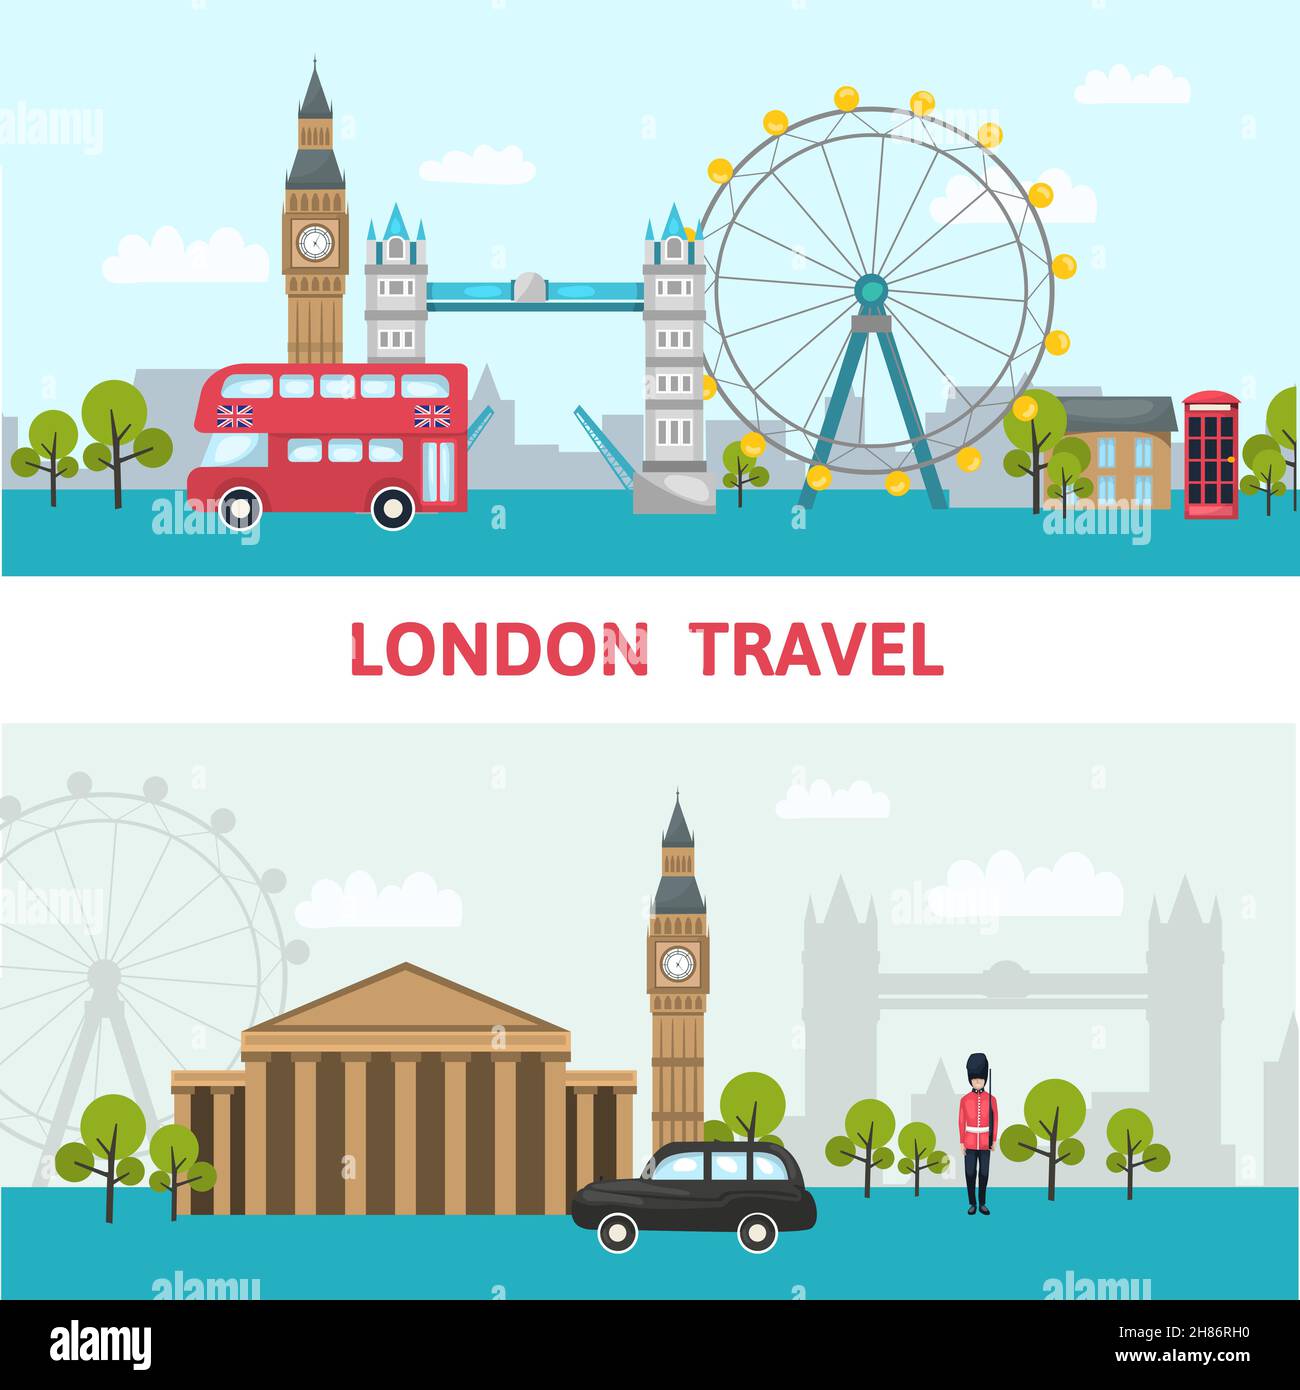 London city skyline poster with headline London travel and sights of the city vector illustration Stock Vector